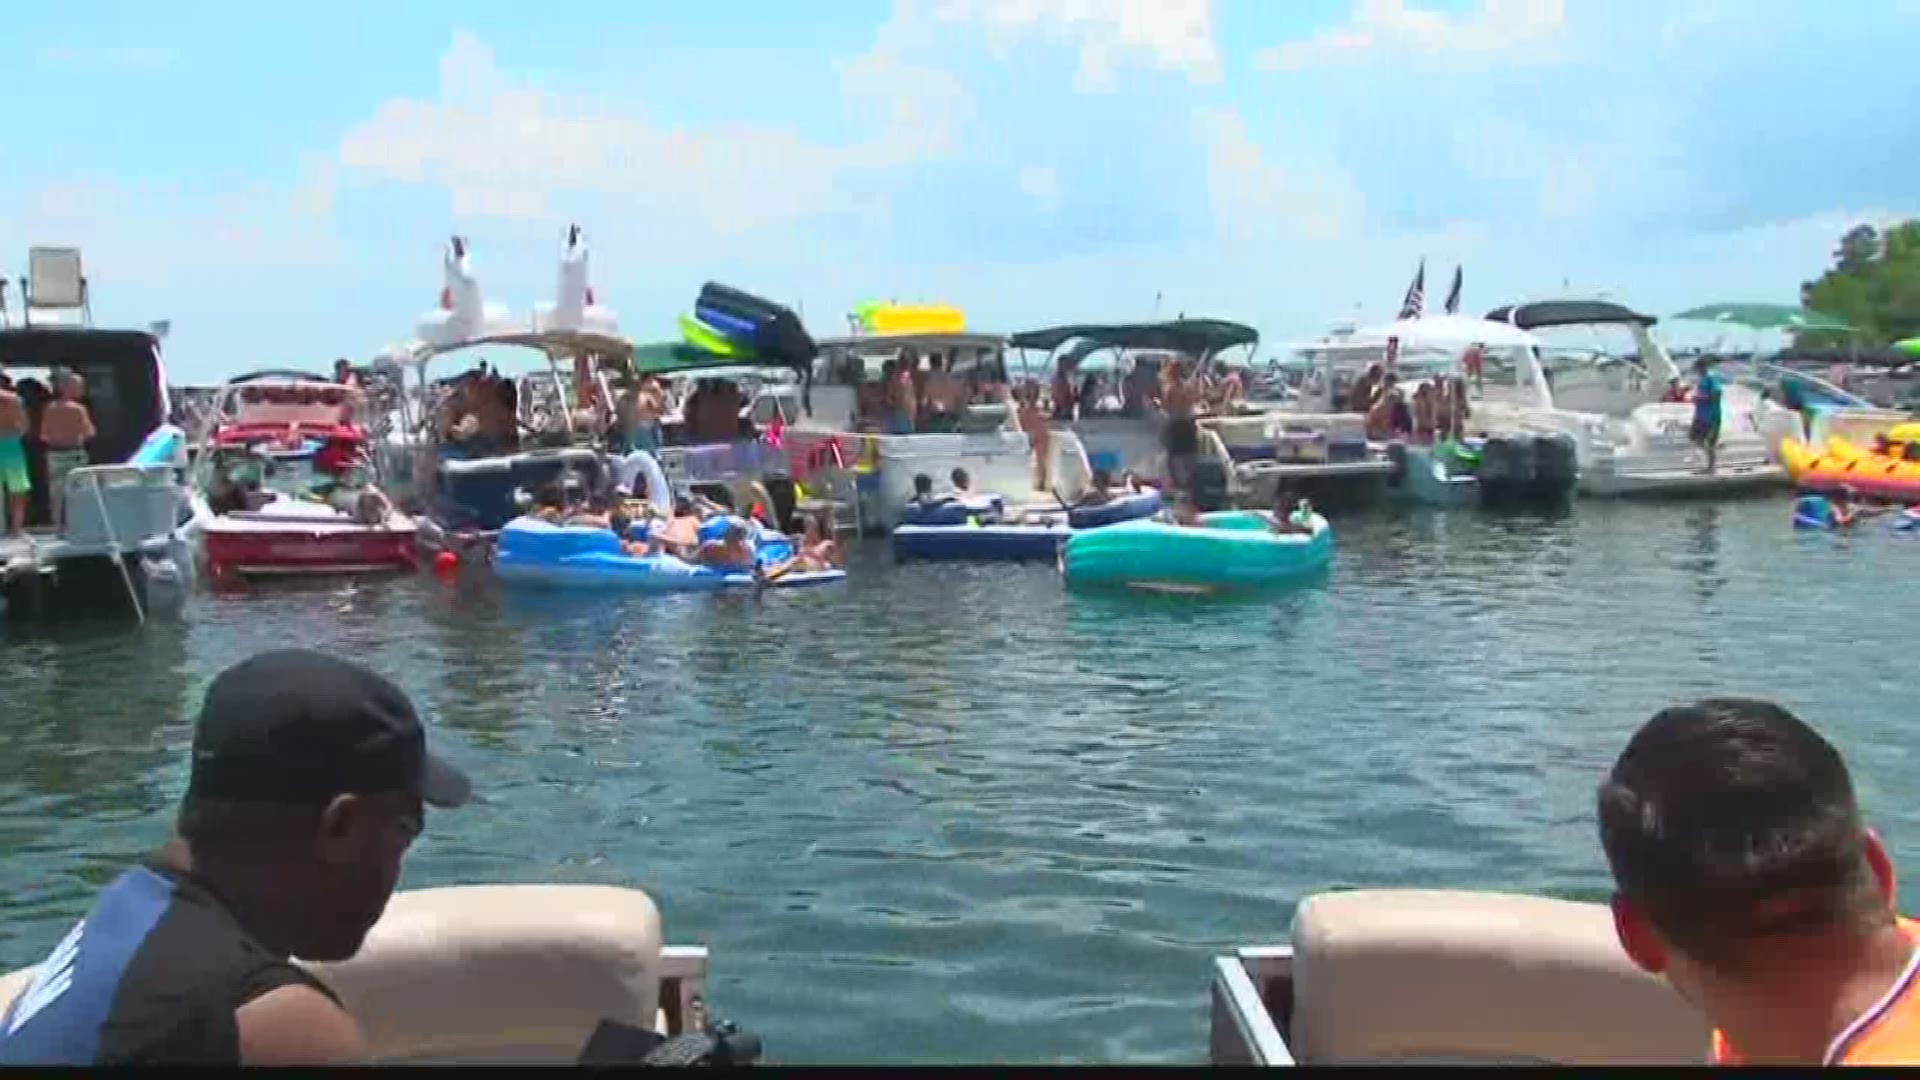 Sometimes referred to as the biggest floating music festival in the world, Drift Jam is raising money for a good cause.